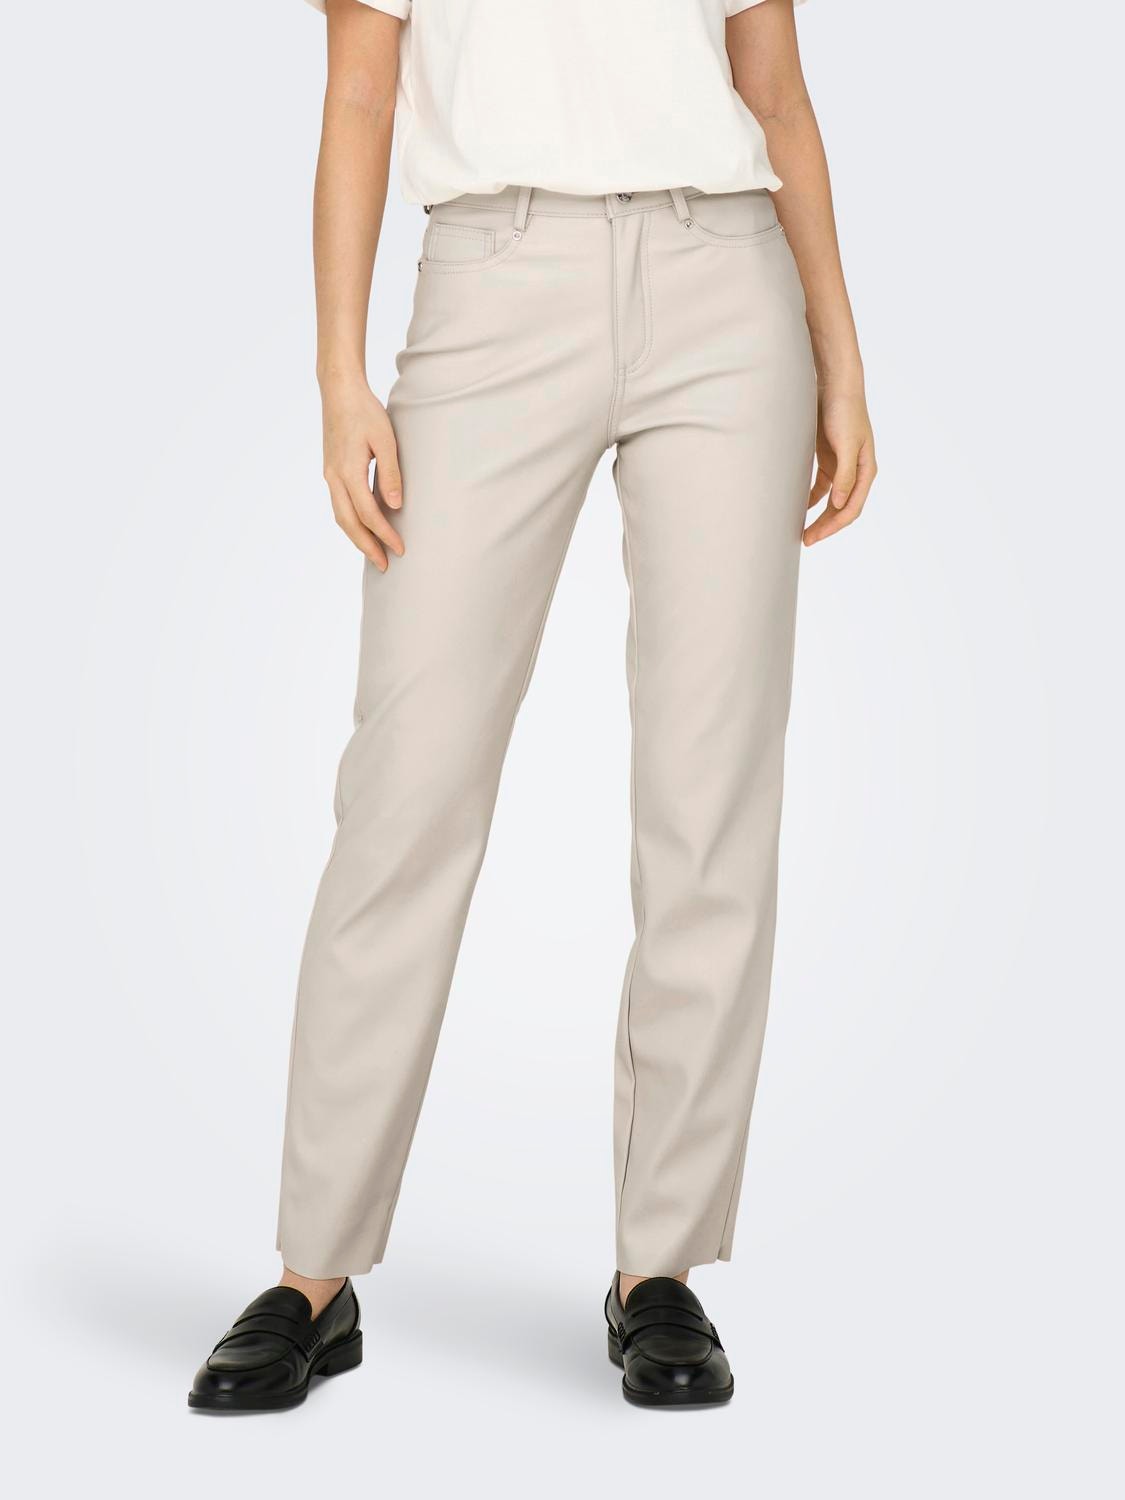 Faux leather Trousers, Light Grey